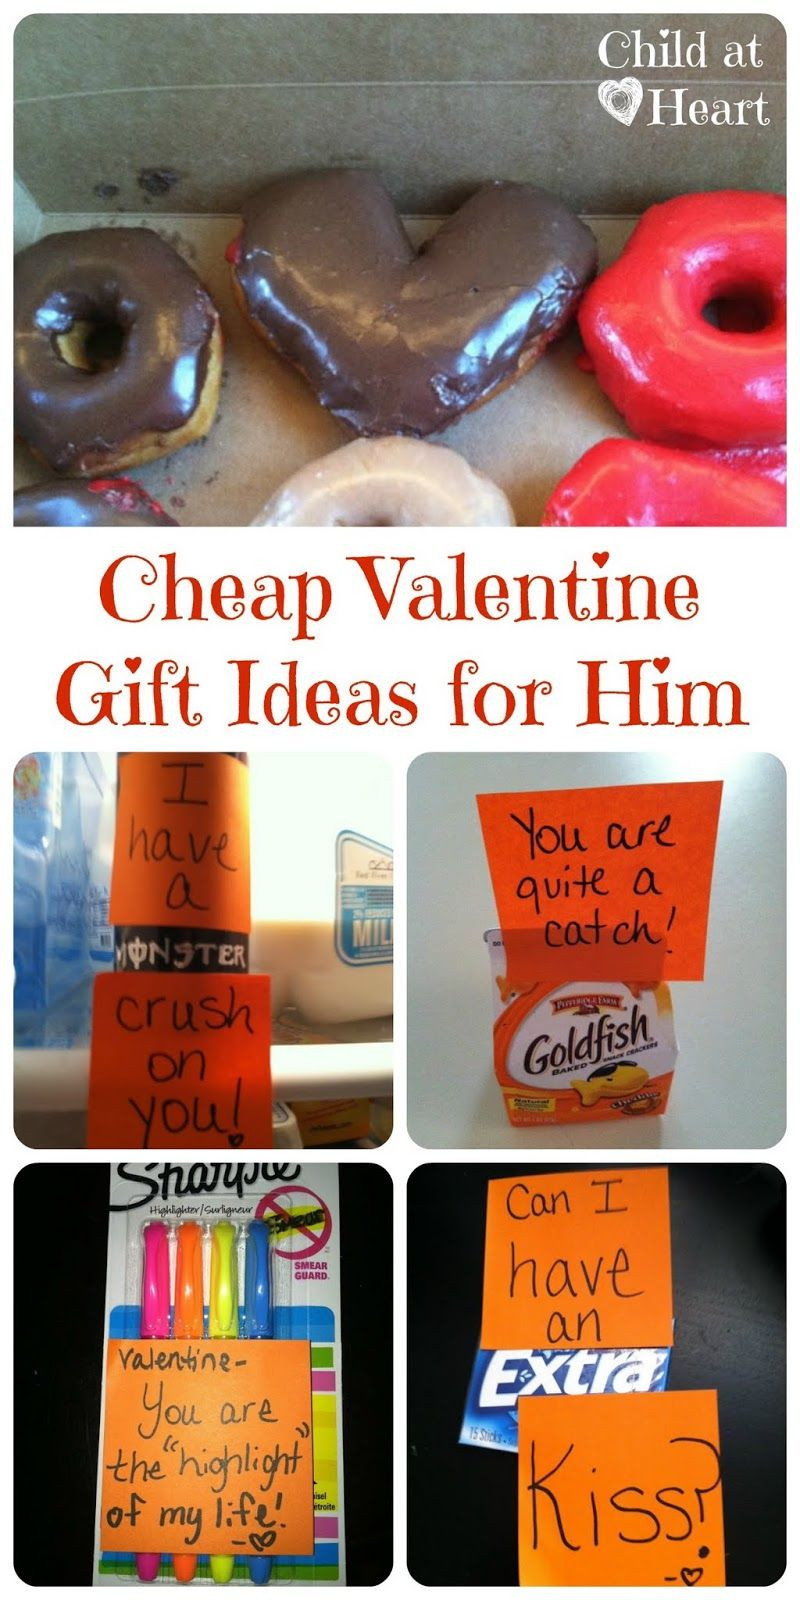 Funny Valentines Gift Ideas
 Cheap Valentine Gift Ideas for Him Deonna Wade